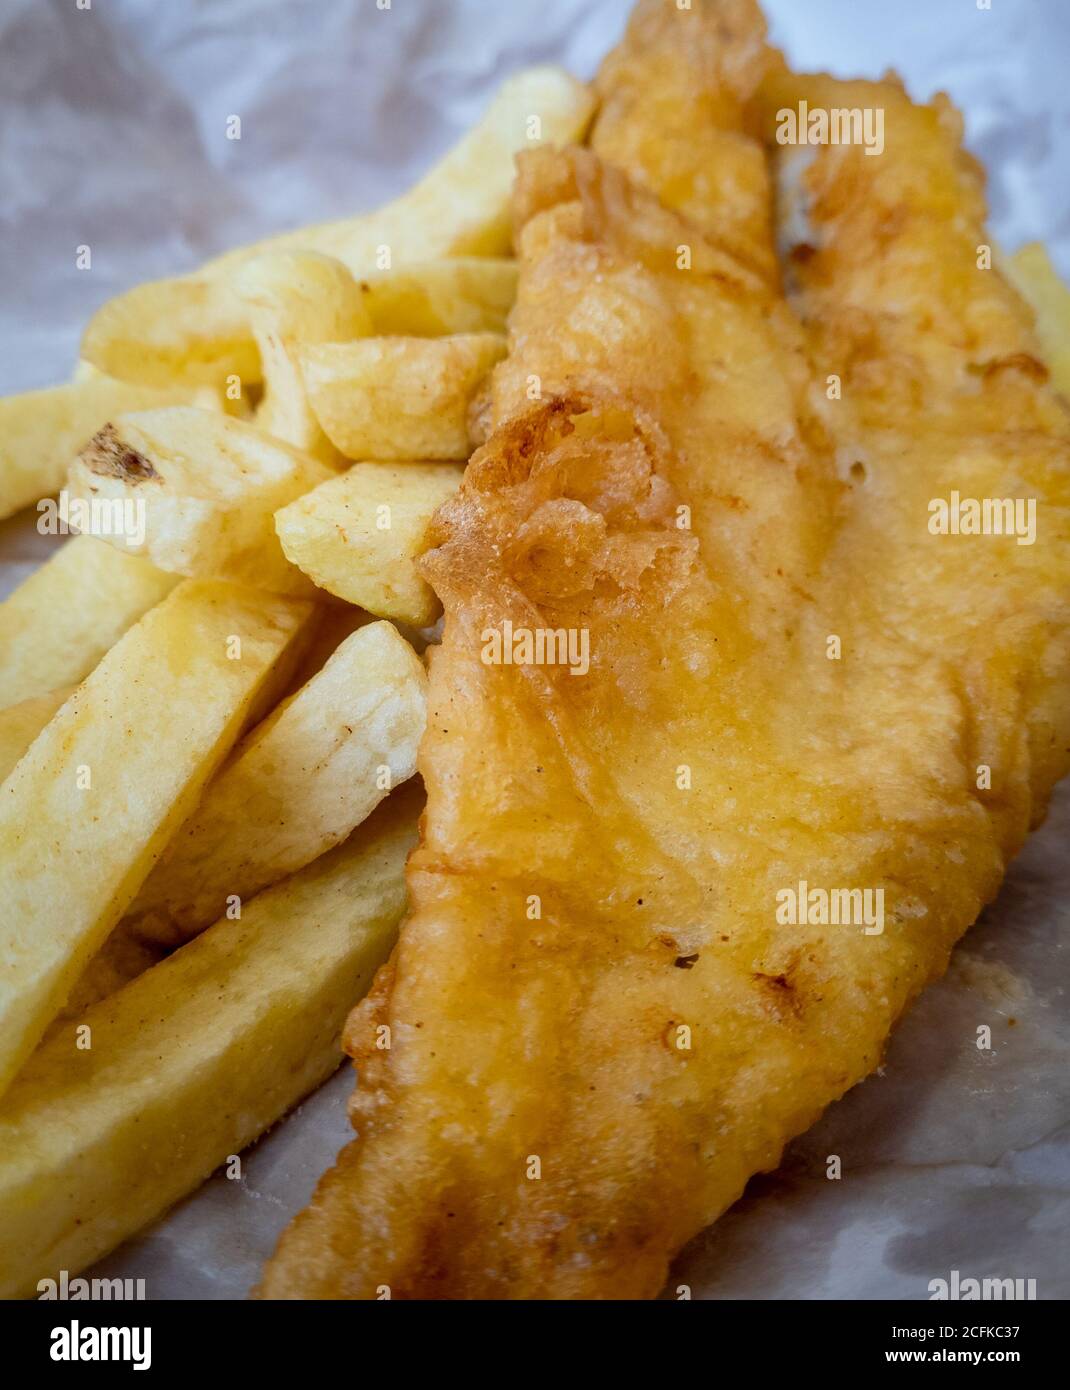 The British cultural cuisine Fish and Chips as served by the chips shop wrapped in paper. Stock Photo